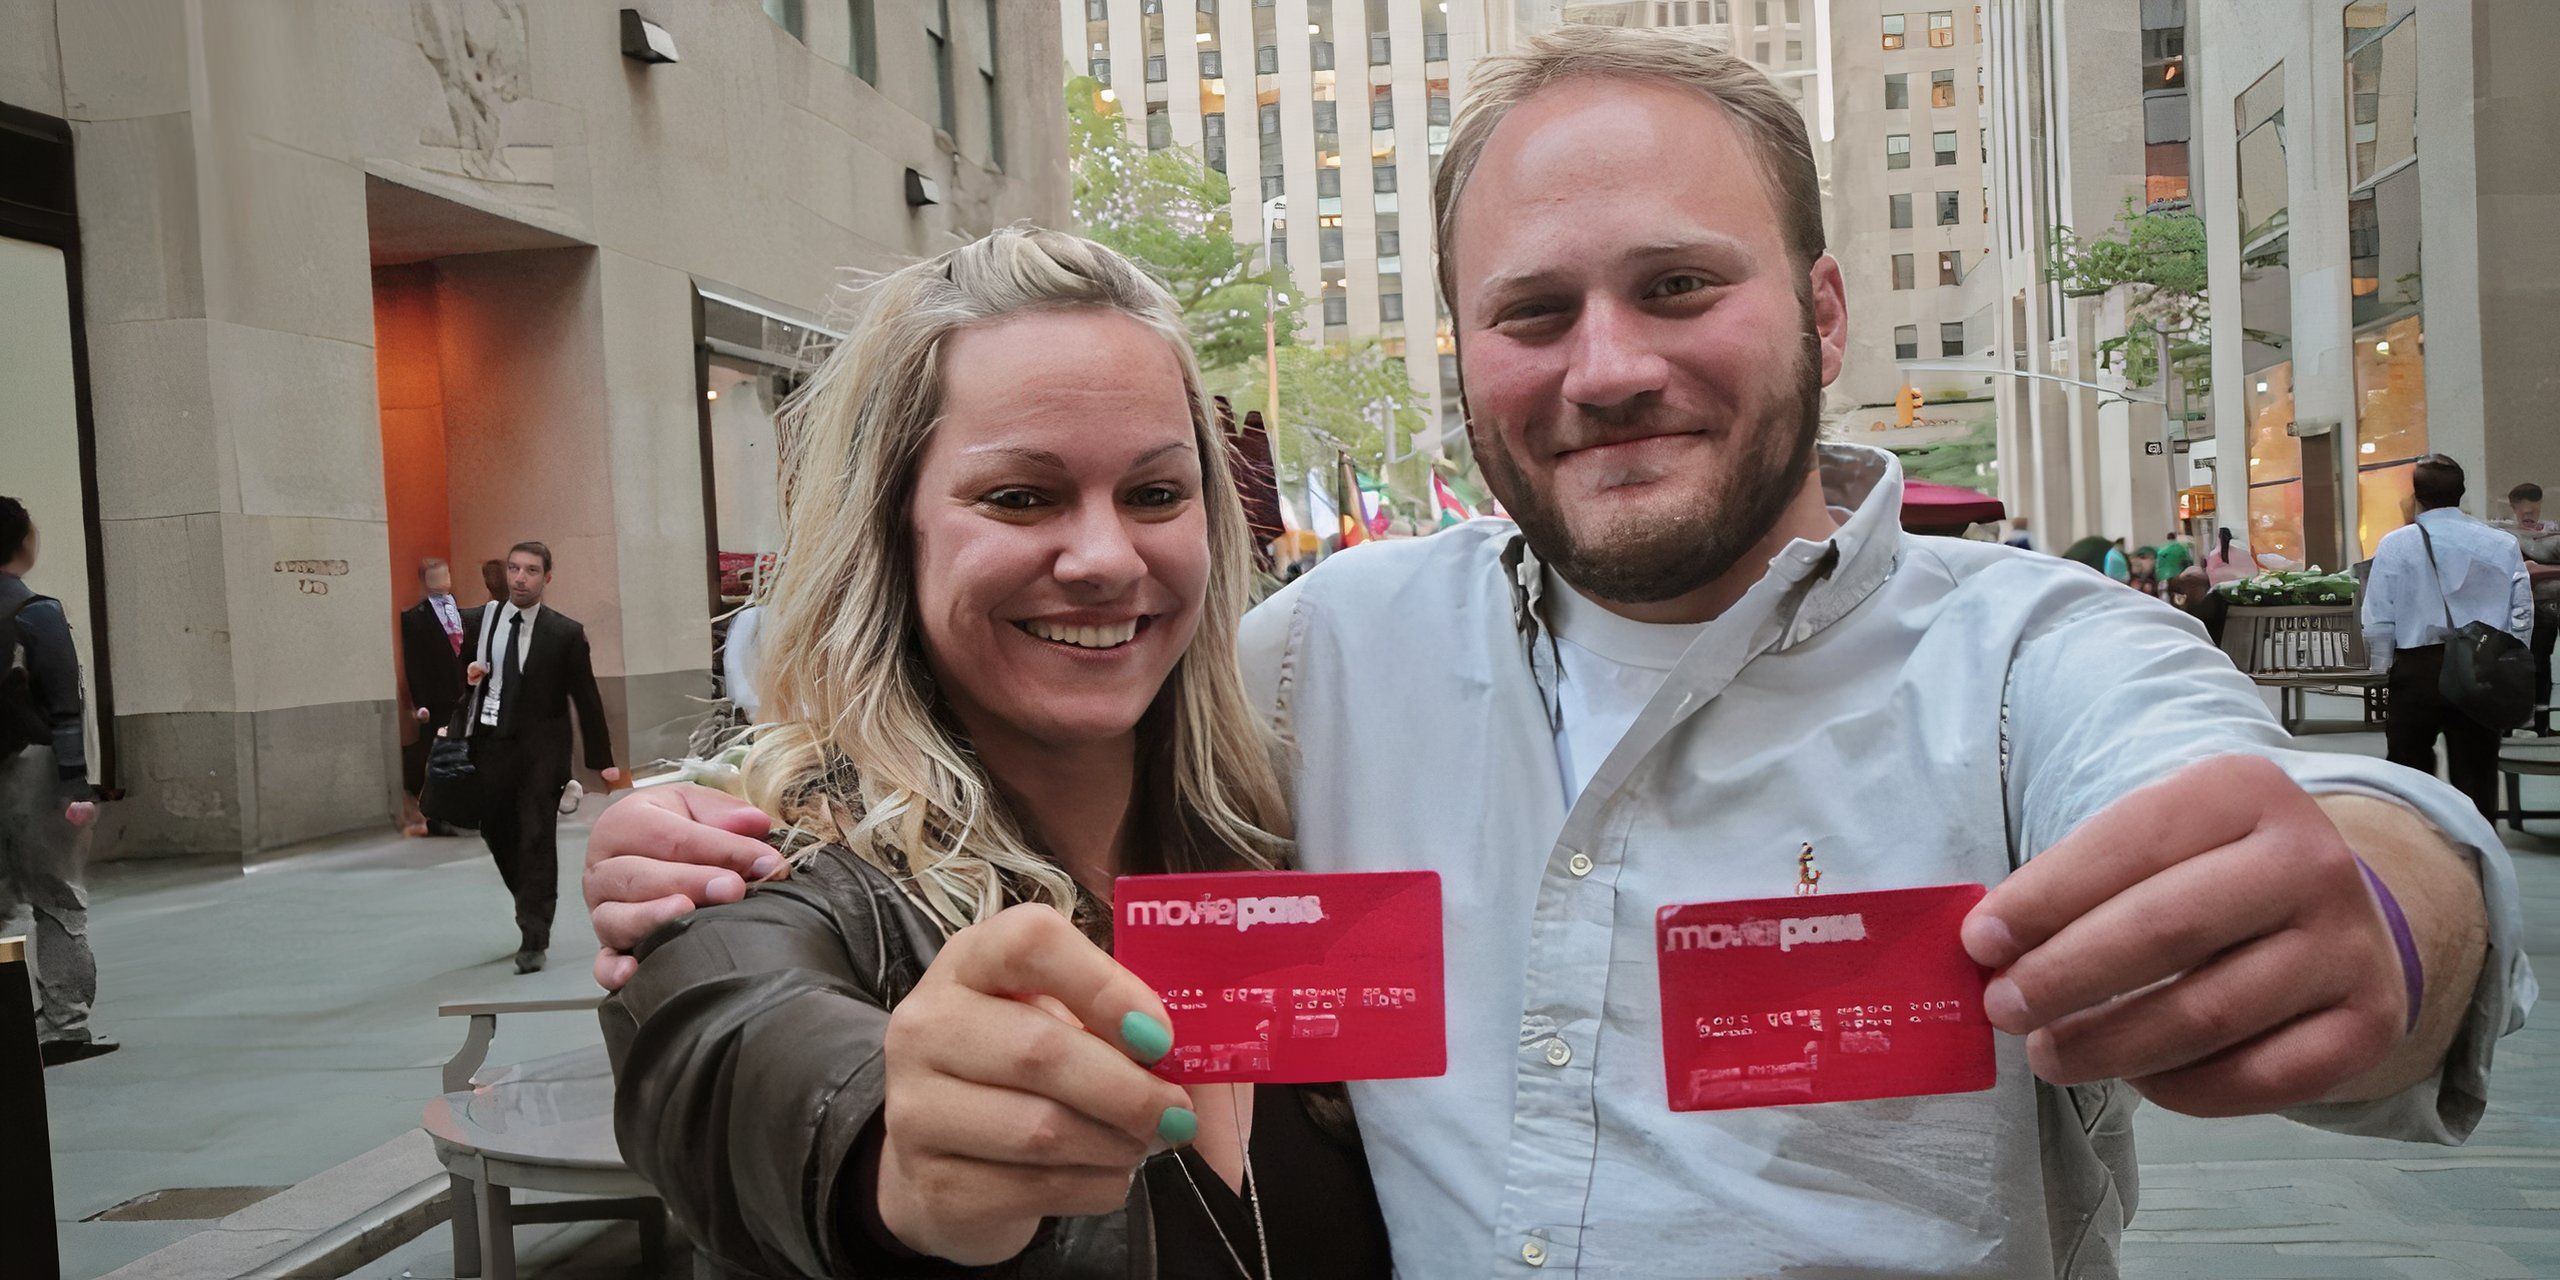 MoviePass, MovieCrash – a pair of subscribers pose with their MoviePass cards in Rockefeller Center